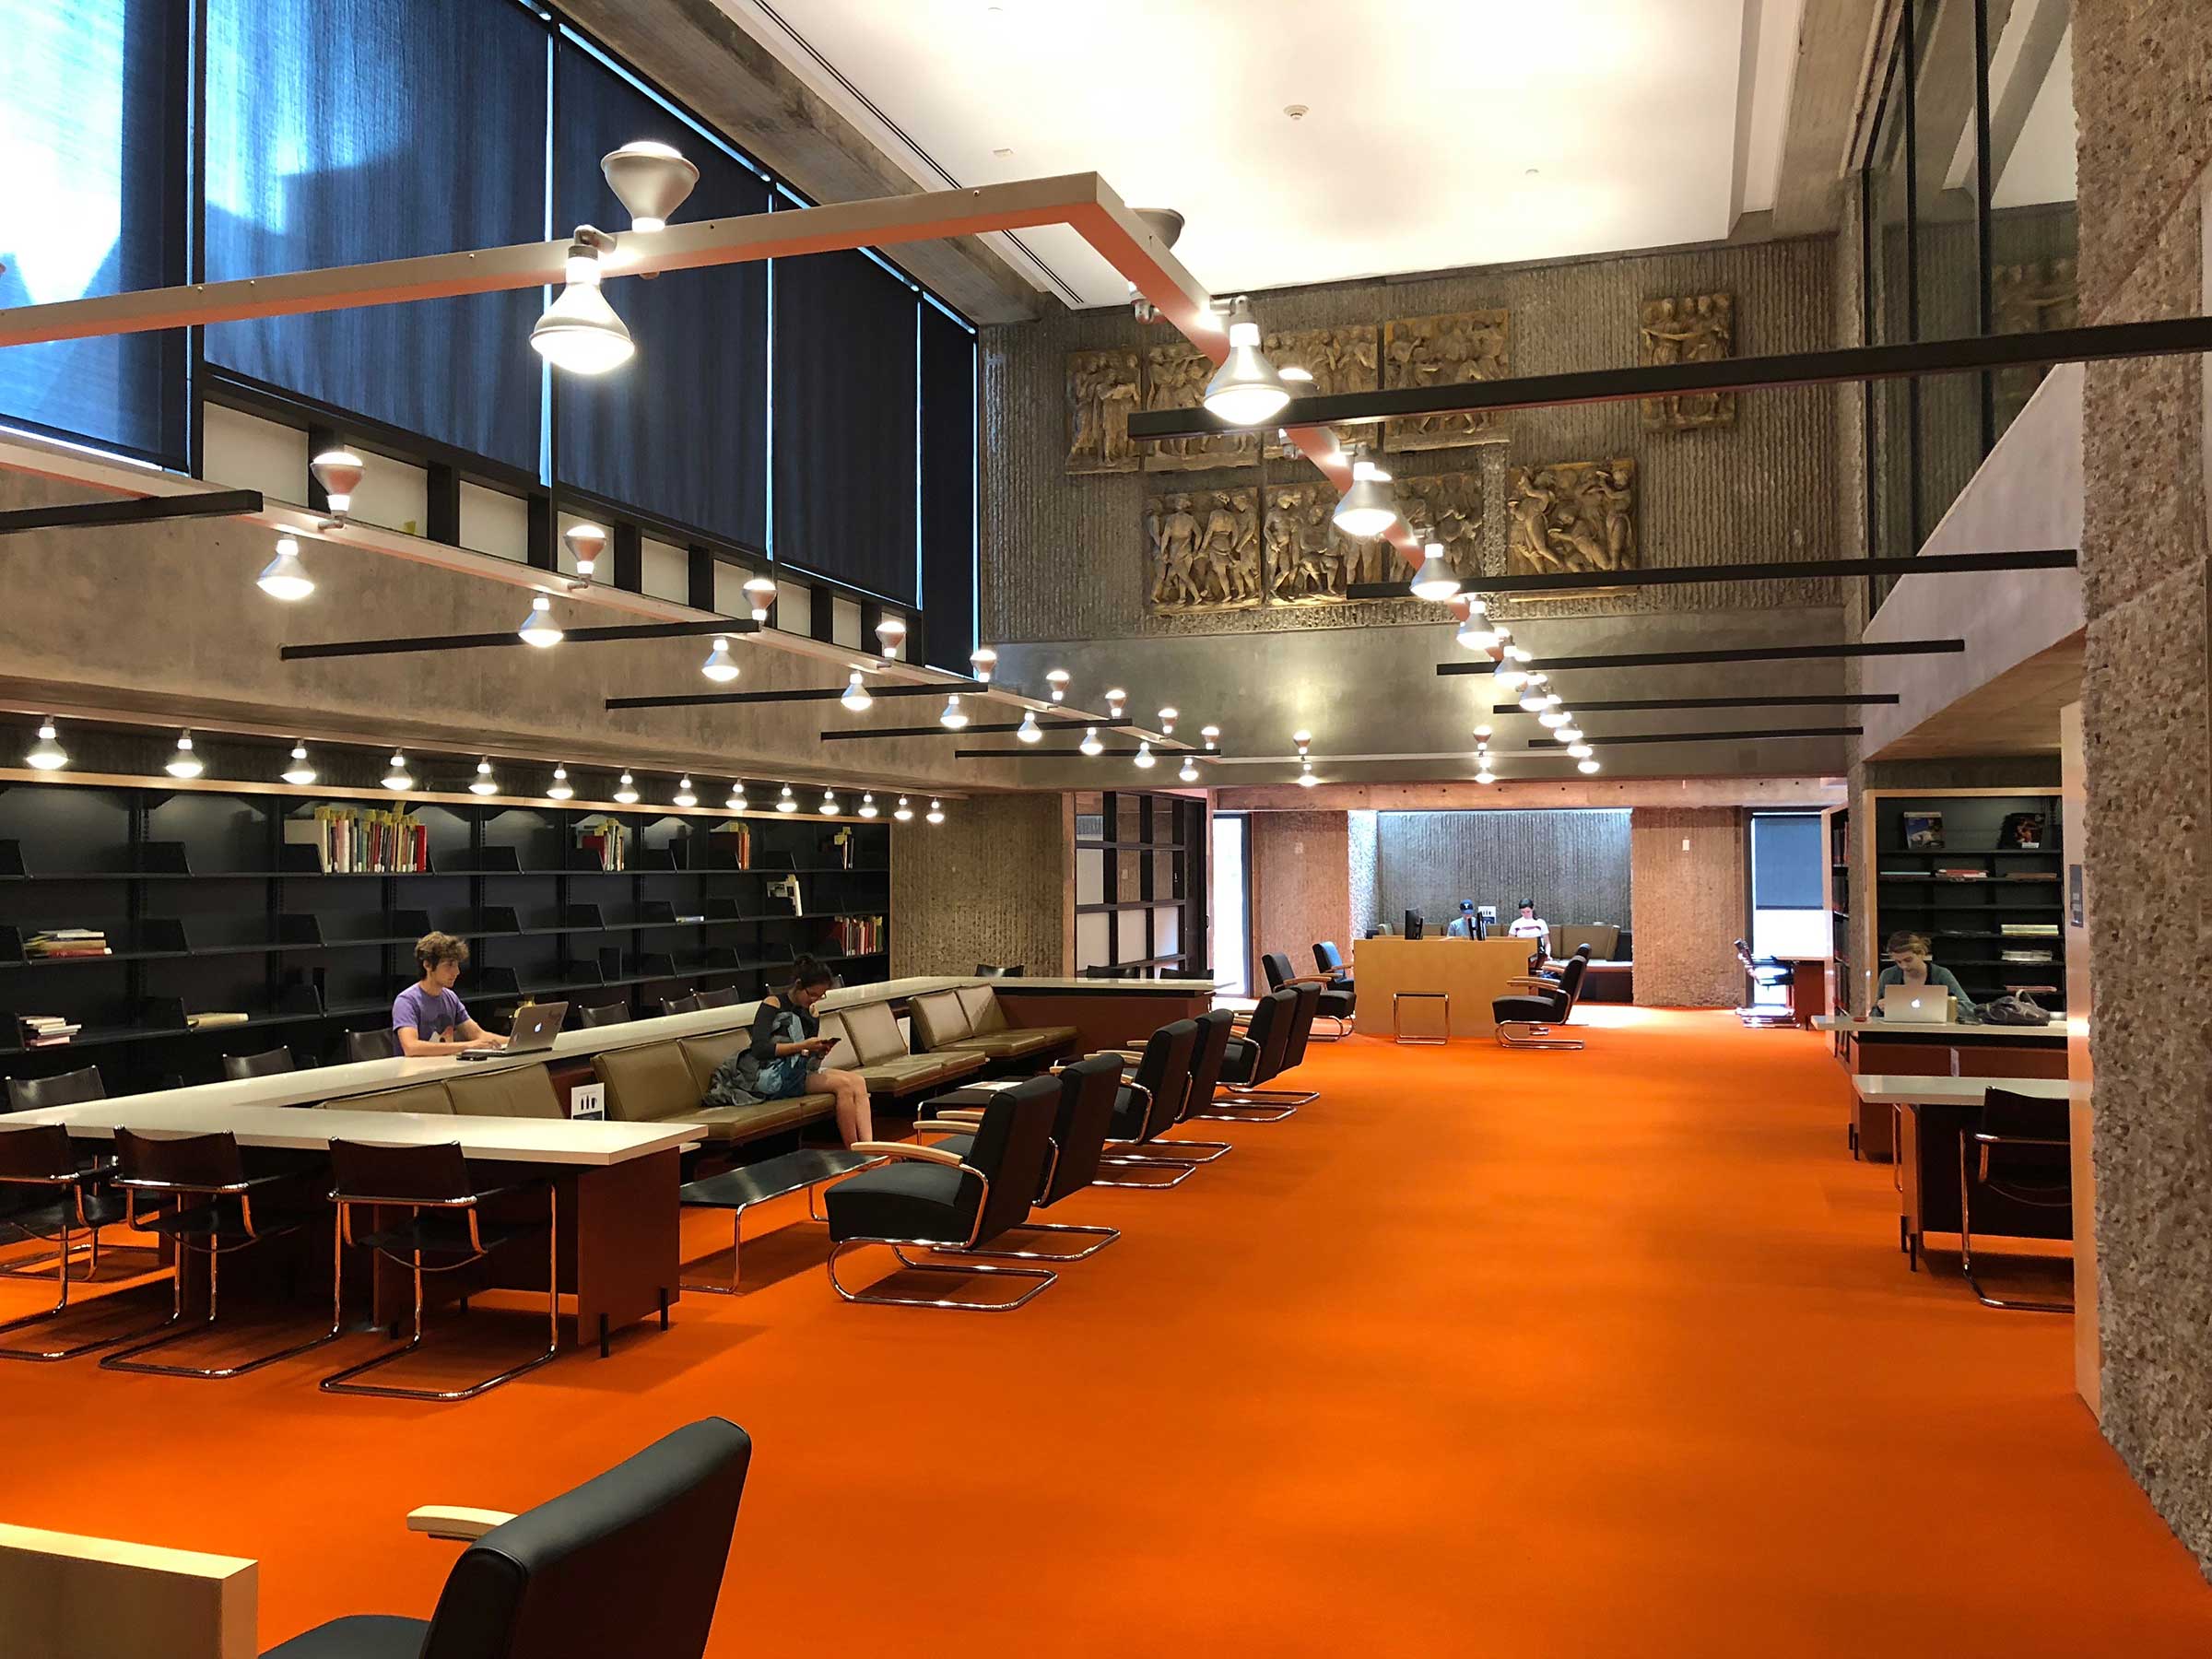 Interior view of Haas Arts Library featuring student studying at long table near book cases.